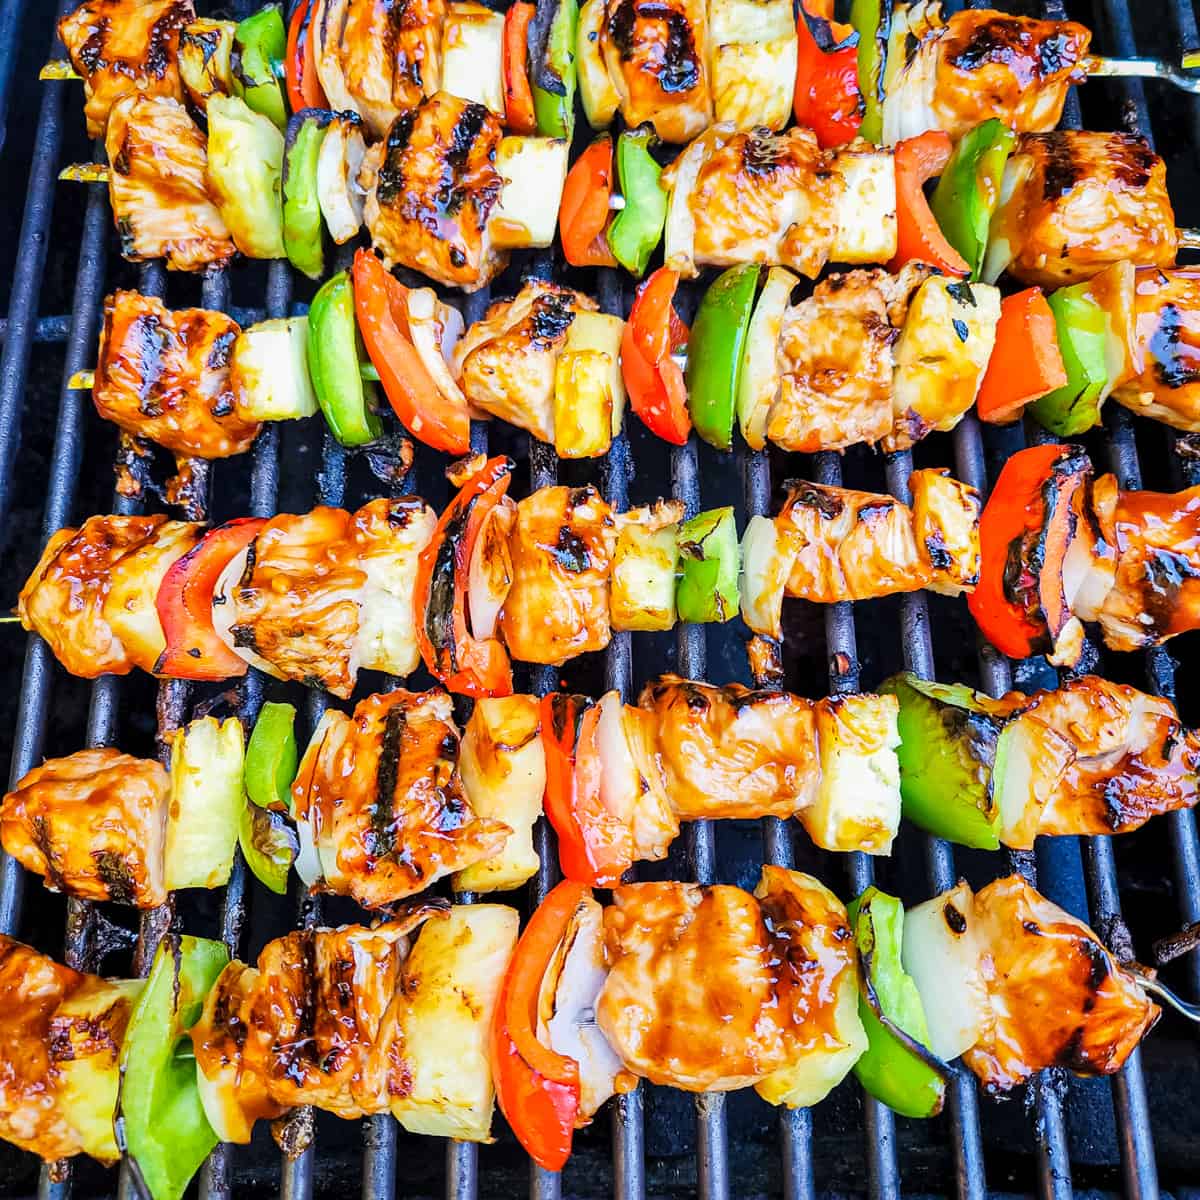 Chicken kebabs coated in huli huli sauce being cooked on a grill. 